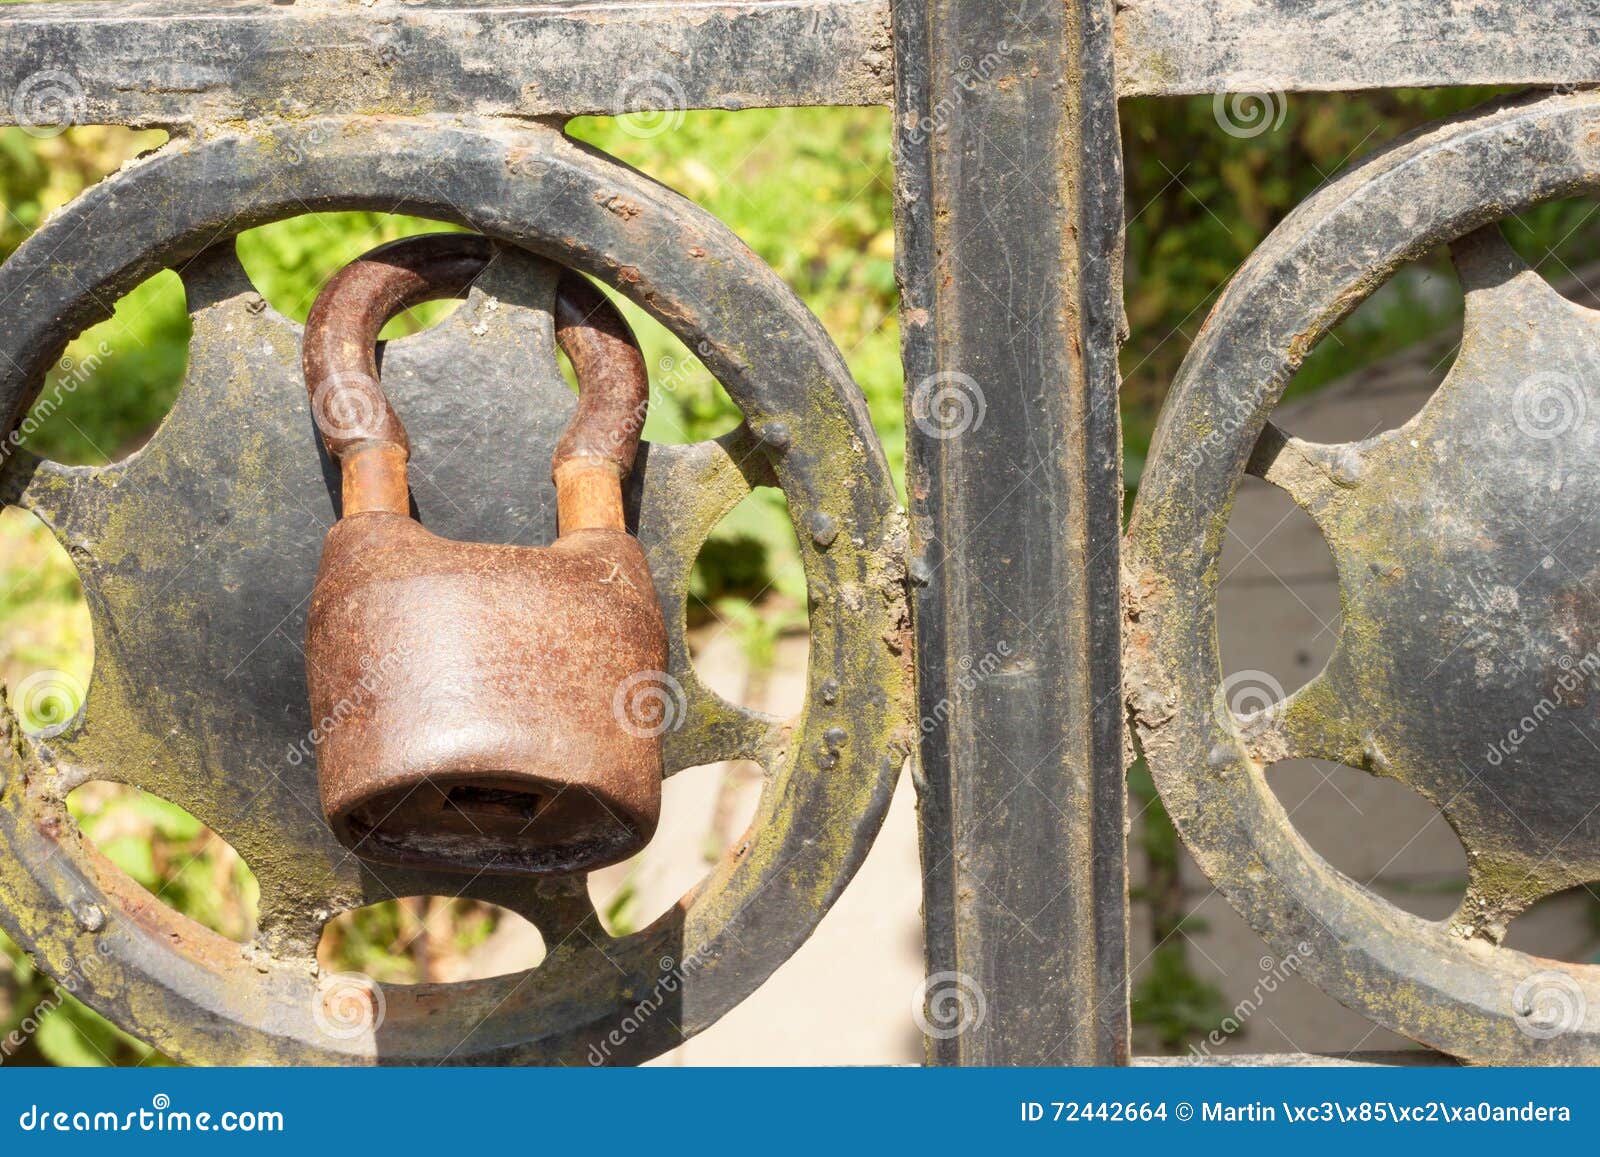 Old Rusty Lock on a Metal Gate into the Garden. Lock on the Iron Gate ...